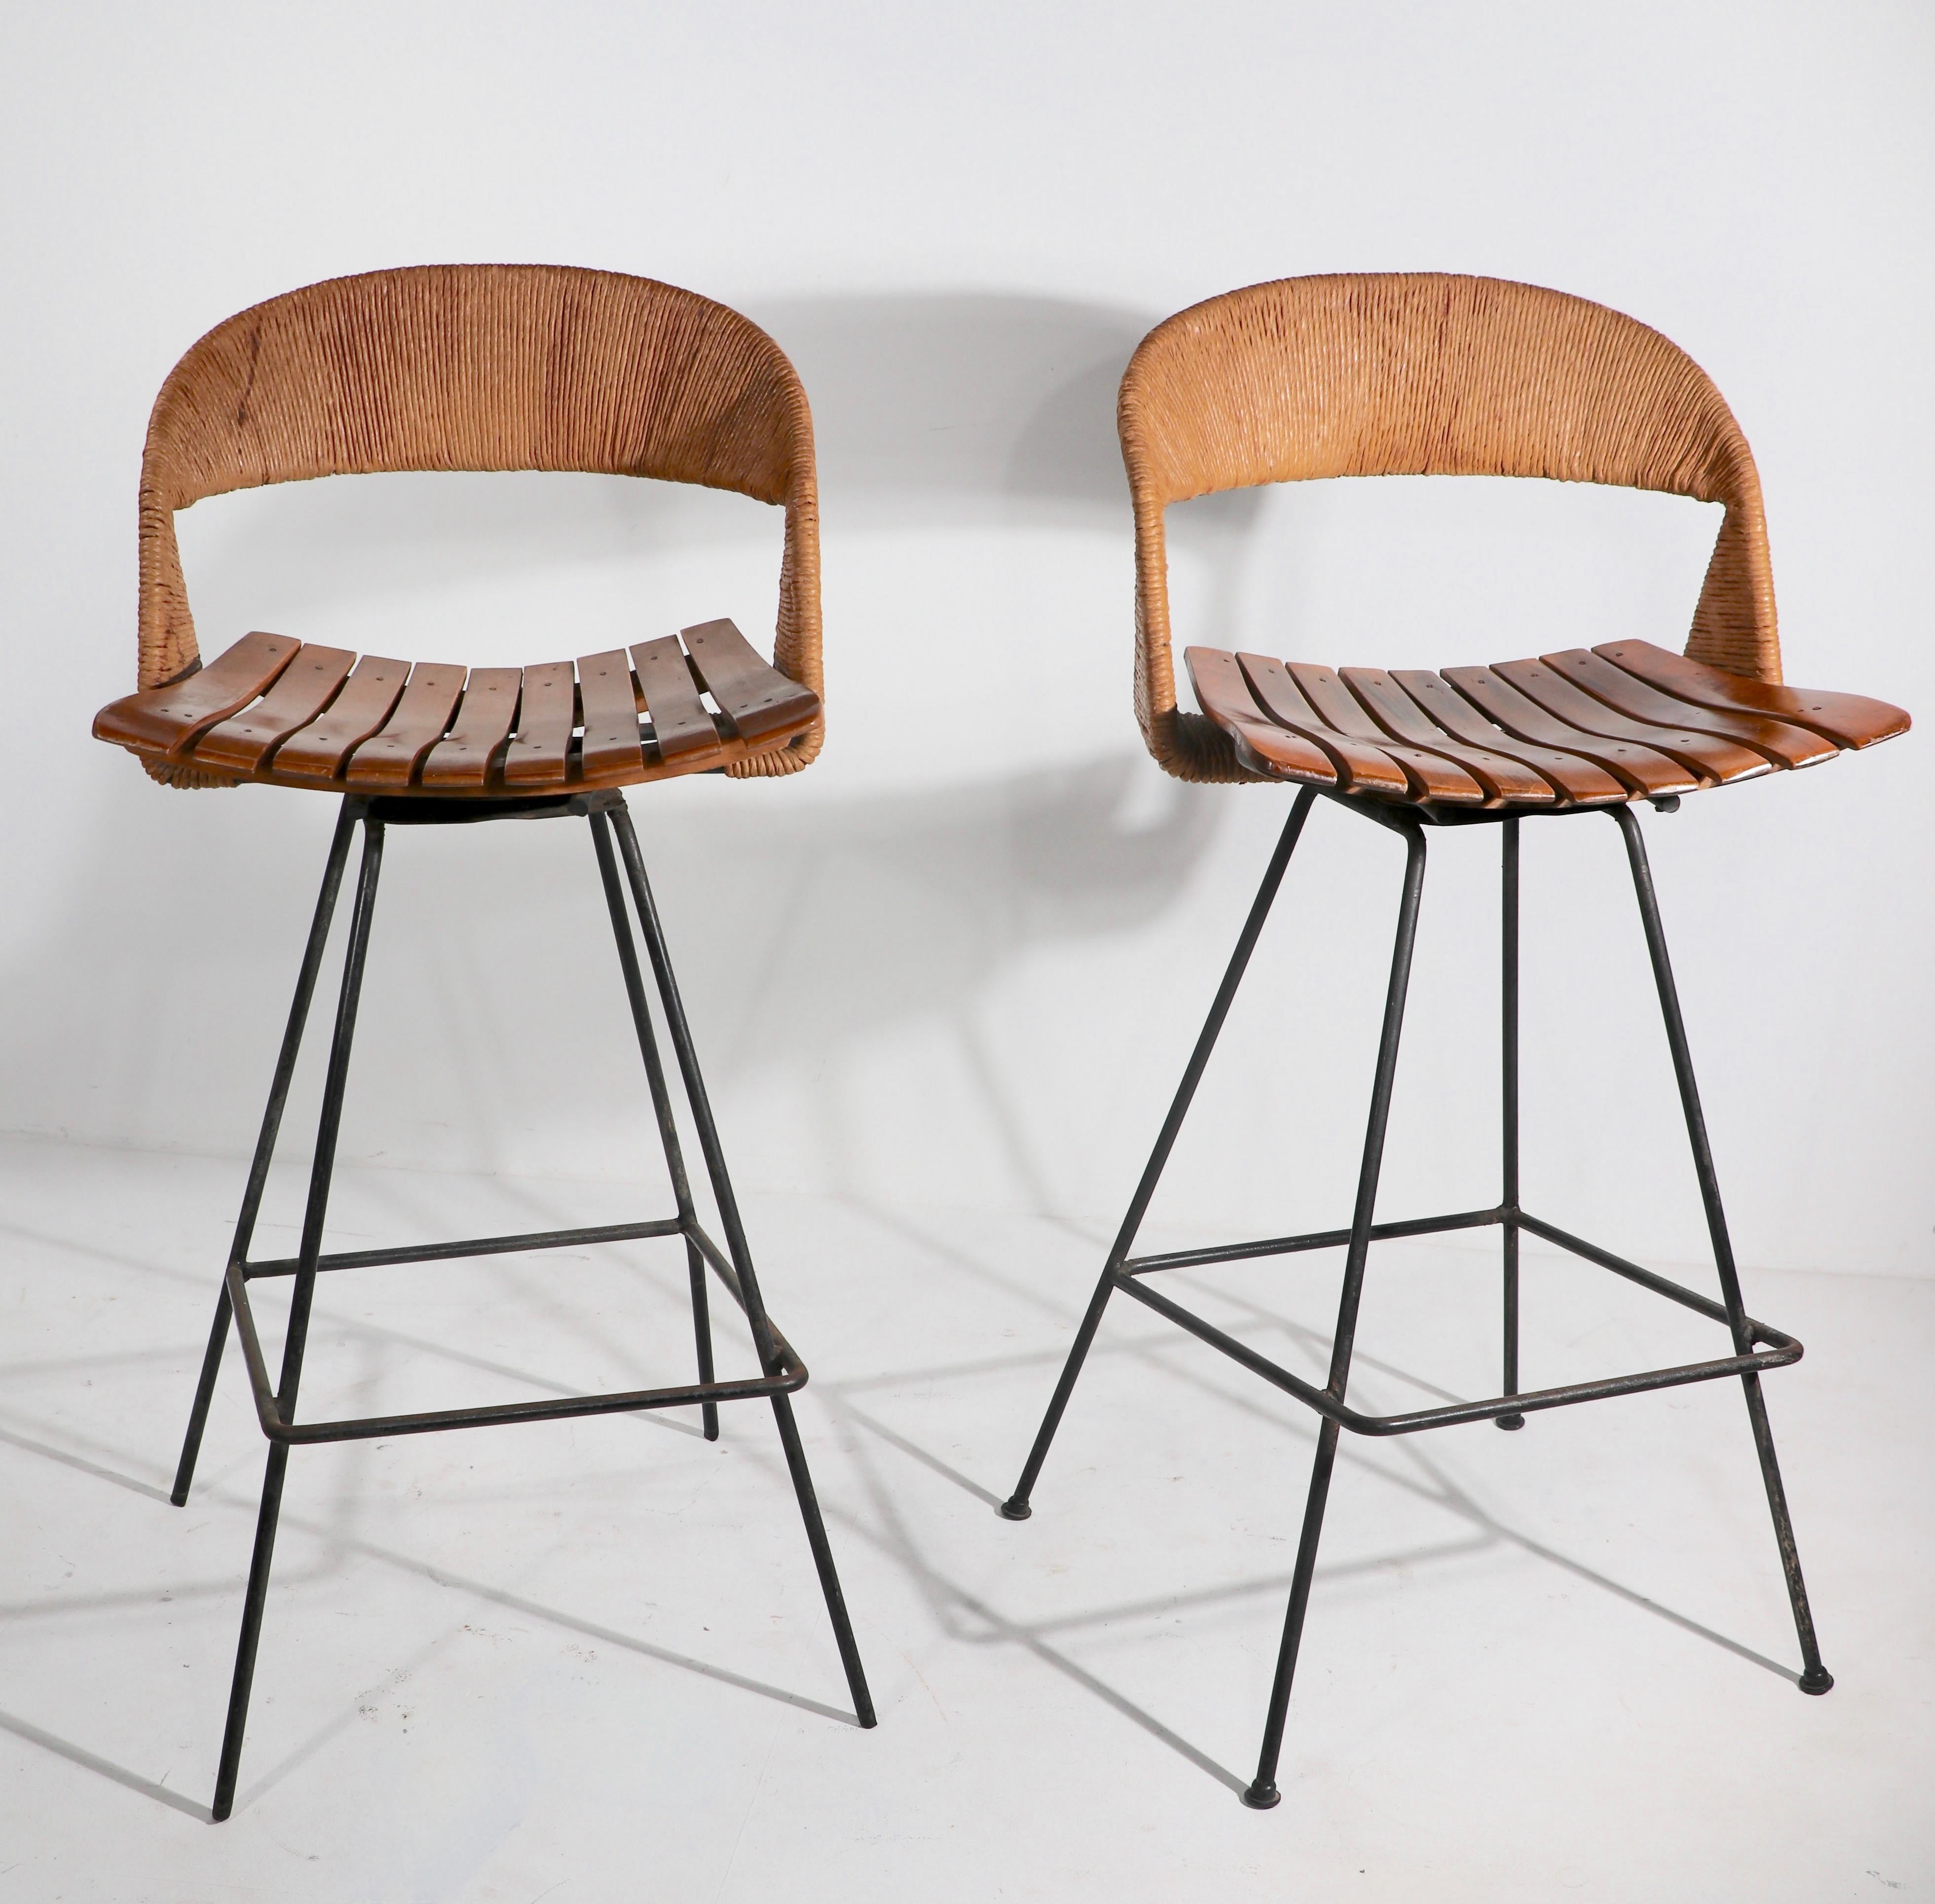 Rare swivel bar stool by Arthur Umanof for Raymor, in good original condition. The stool features a cord wrapped backrest, wood slat seat, and wrought iron base. The stool has some imperfections as follows> One back leg is slightly bent, the plastic